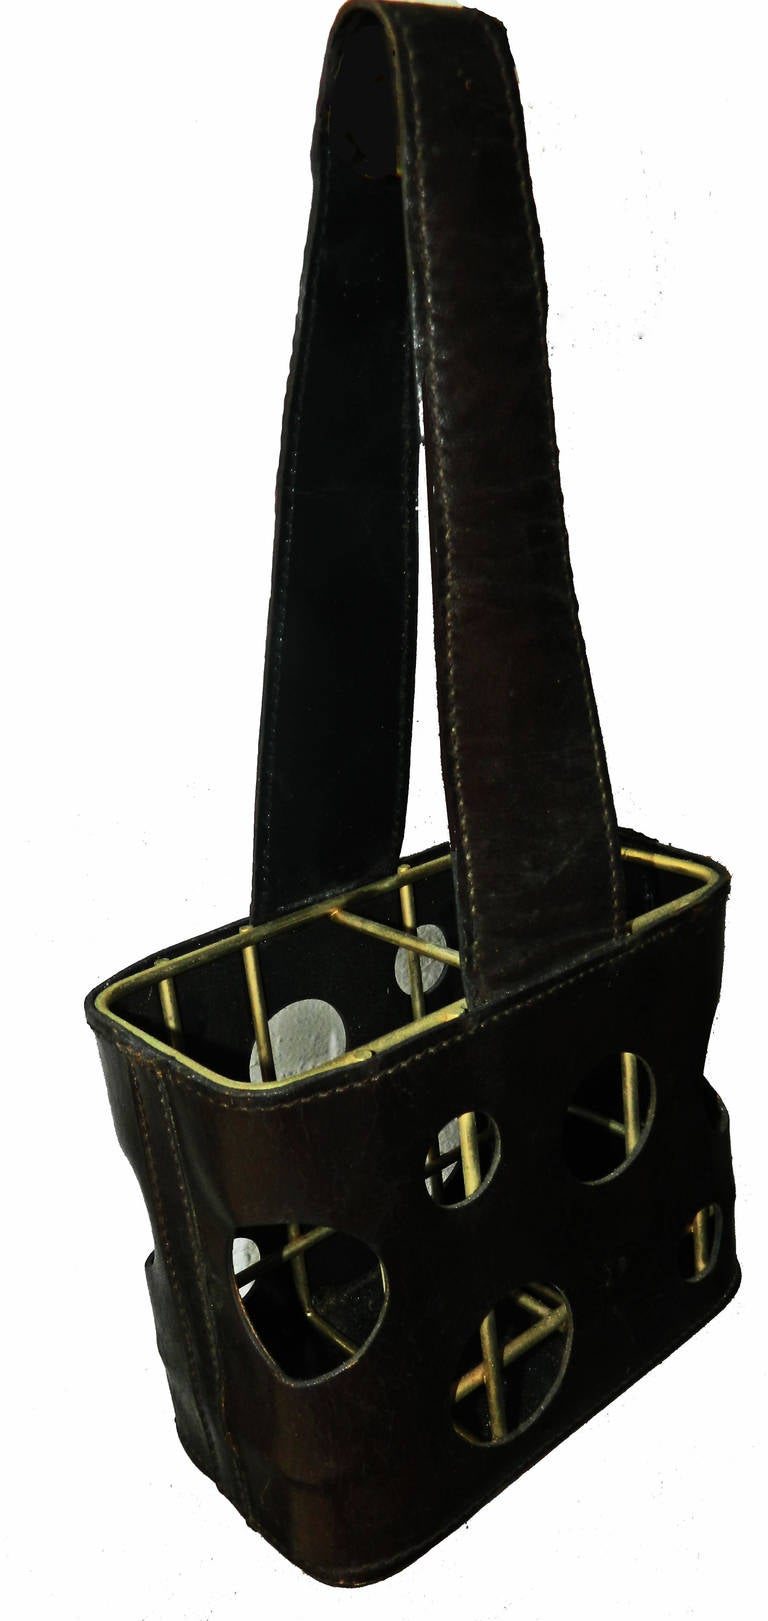 Jacques Adnet bottle holder in black stitched faux leather and brass.